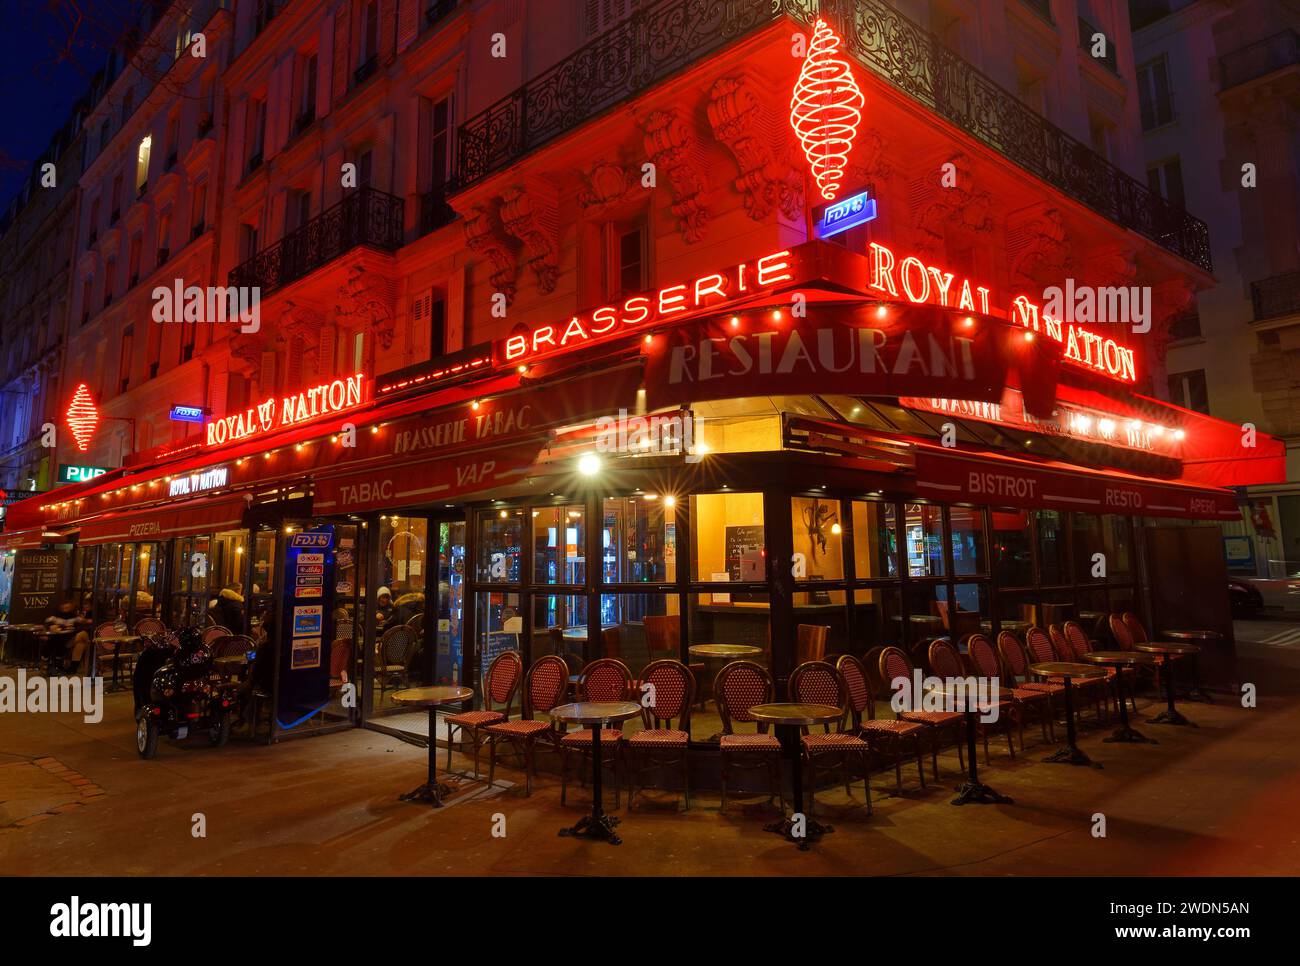 The traditional French cafe brasserie Royal Nation at night.It is ...